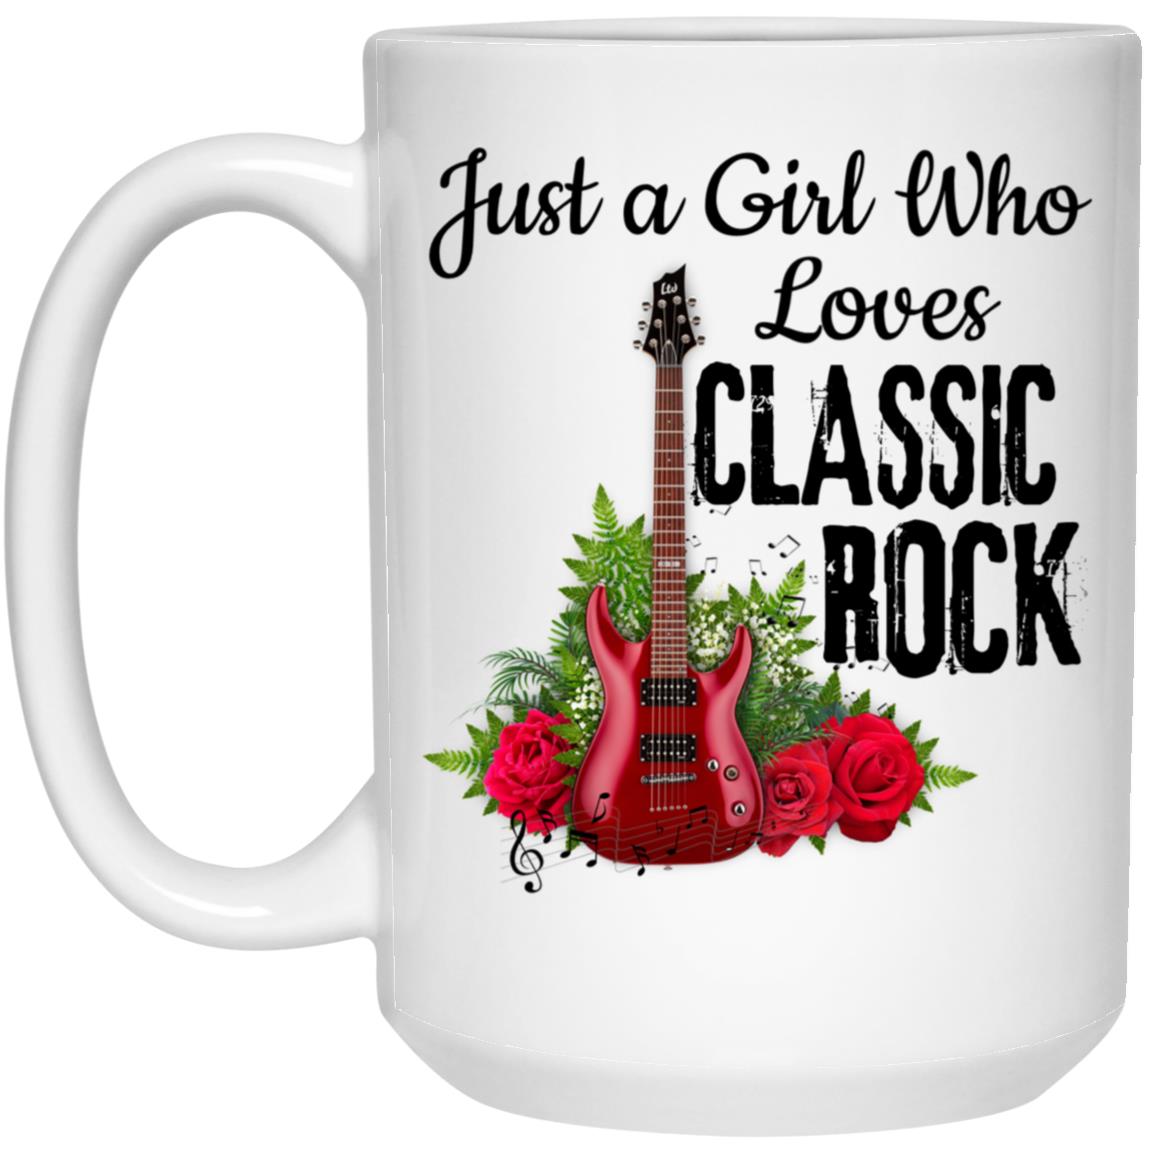 Just a Girl Who Loves Classic Rock Mug